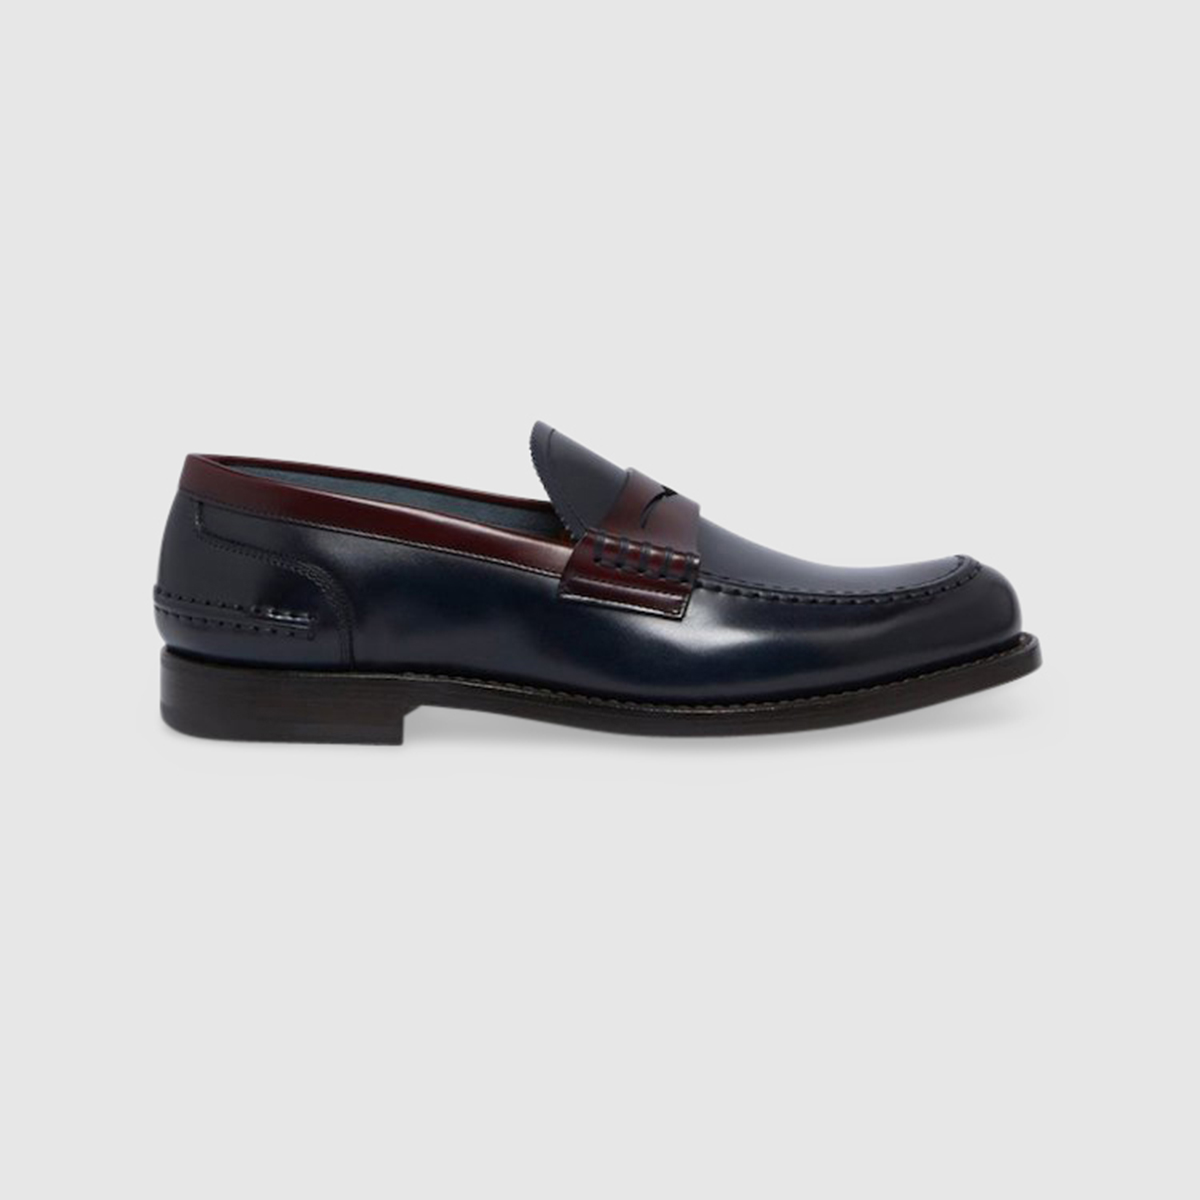 Classic Loafers in Bicolor Blue & Leather Calfskin